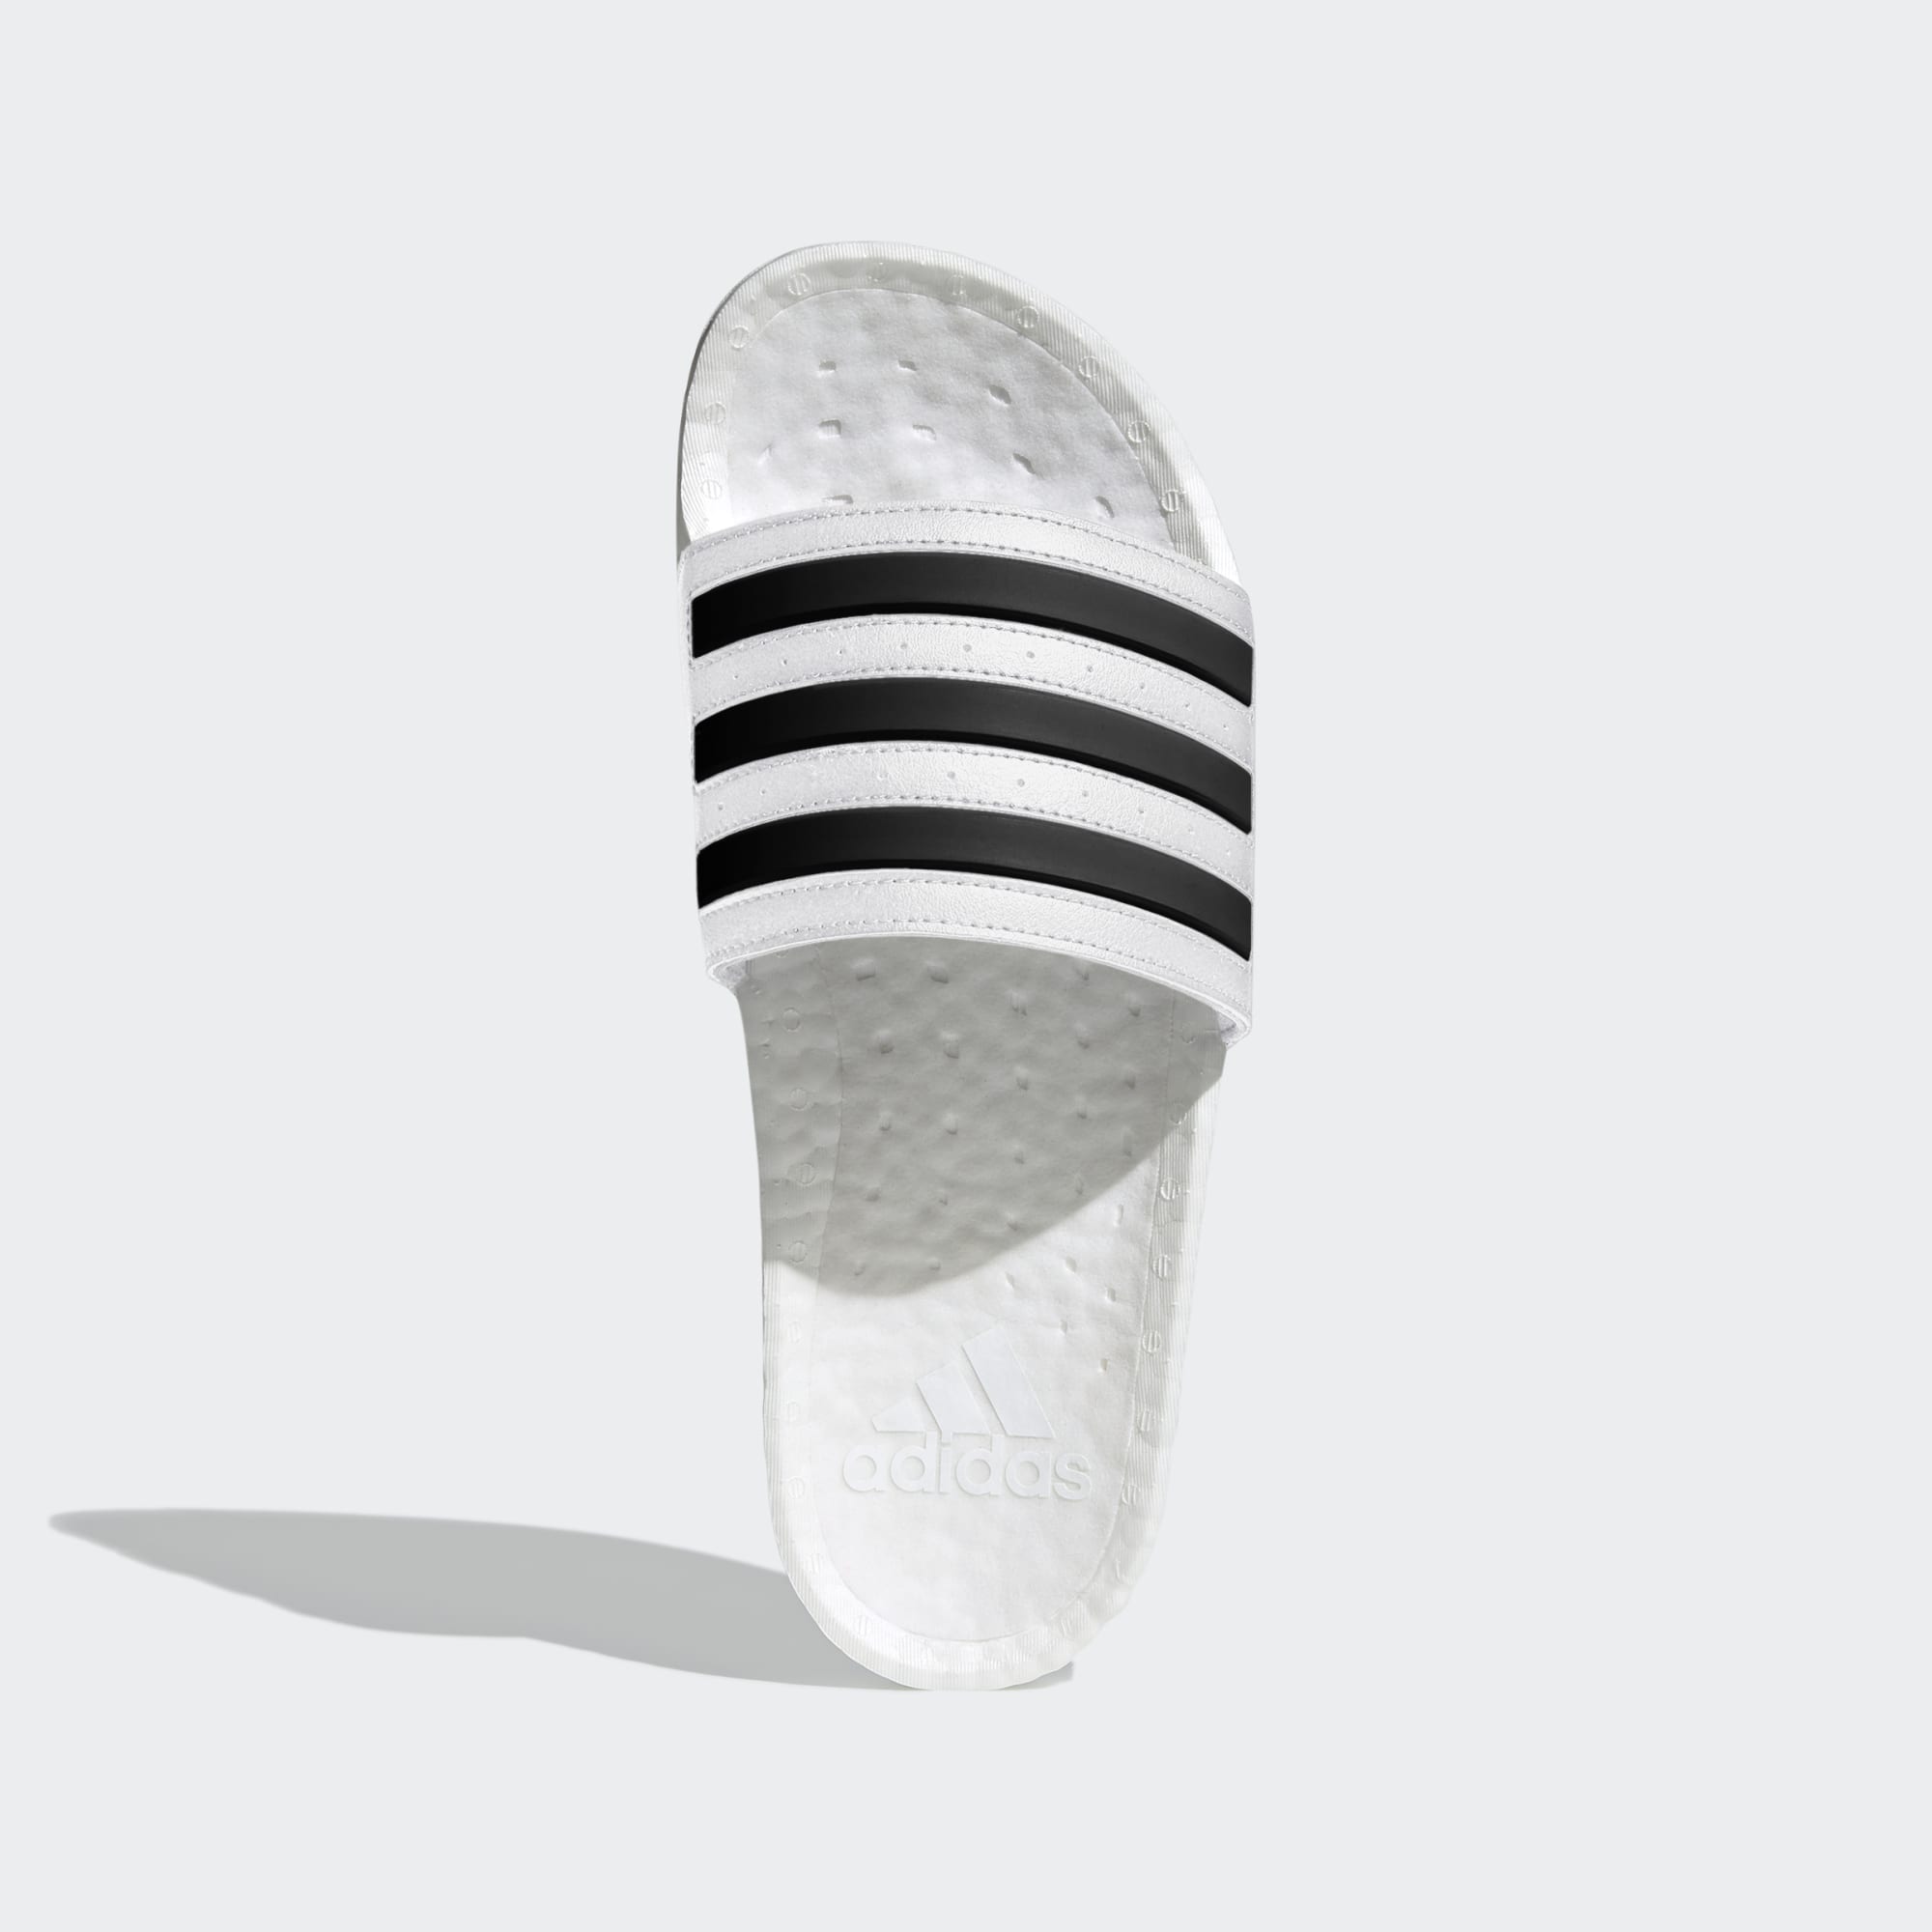 adidas alerts on Twitter: "Now available on #adidas US. adidas adilette  Boost. —&gt; https://t.co/wEapVLZRzB #ad https://t.co/53oMhihzWl" / Twitter